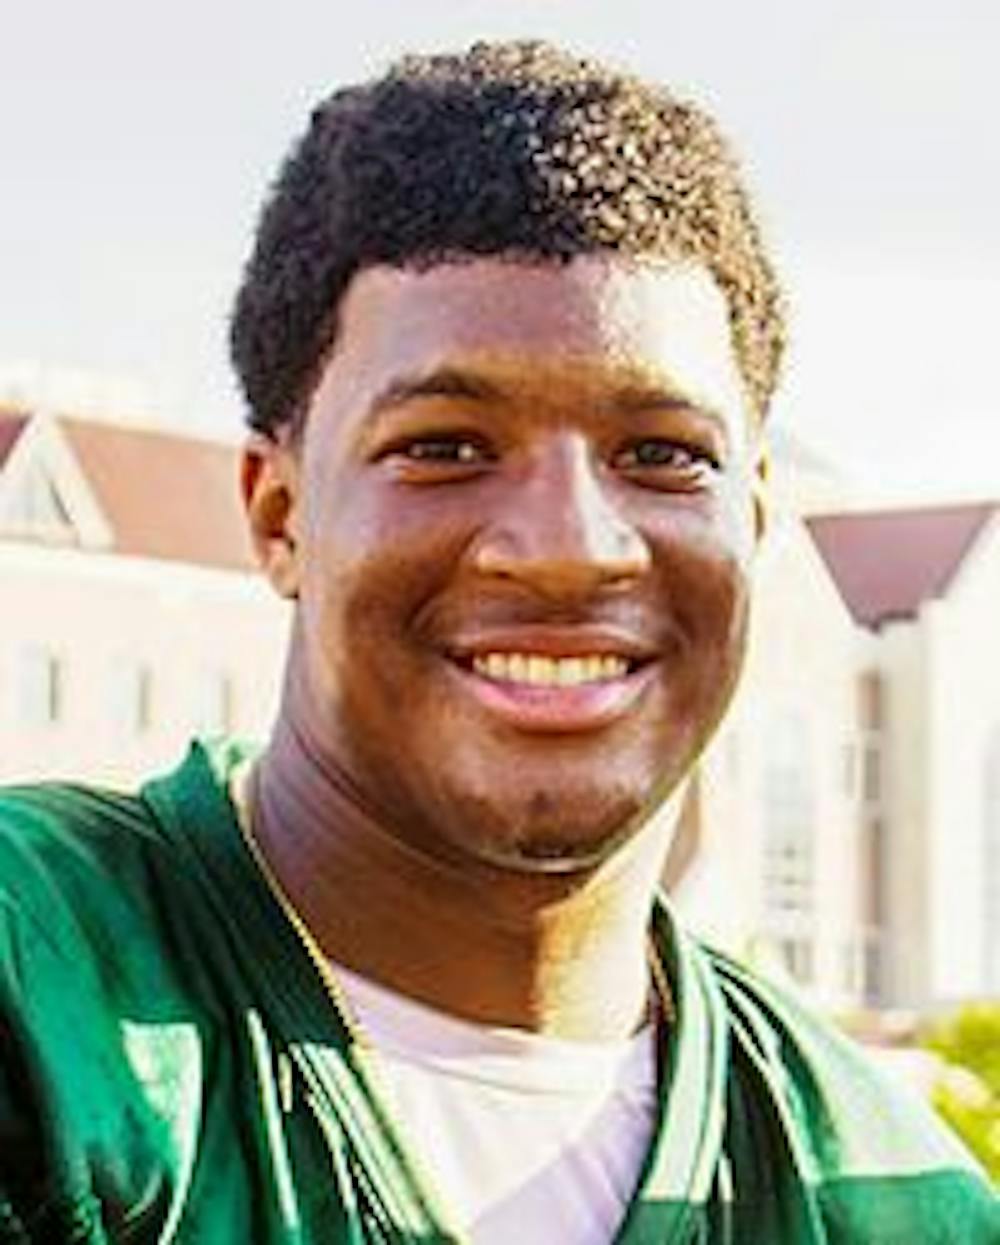 Jameis Winston continues to play despite a checkered past at Florida State. If Winston was a Cavalier, columnist Chanhong Luu writes, he wouldn't be in the active lineup right now. 